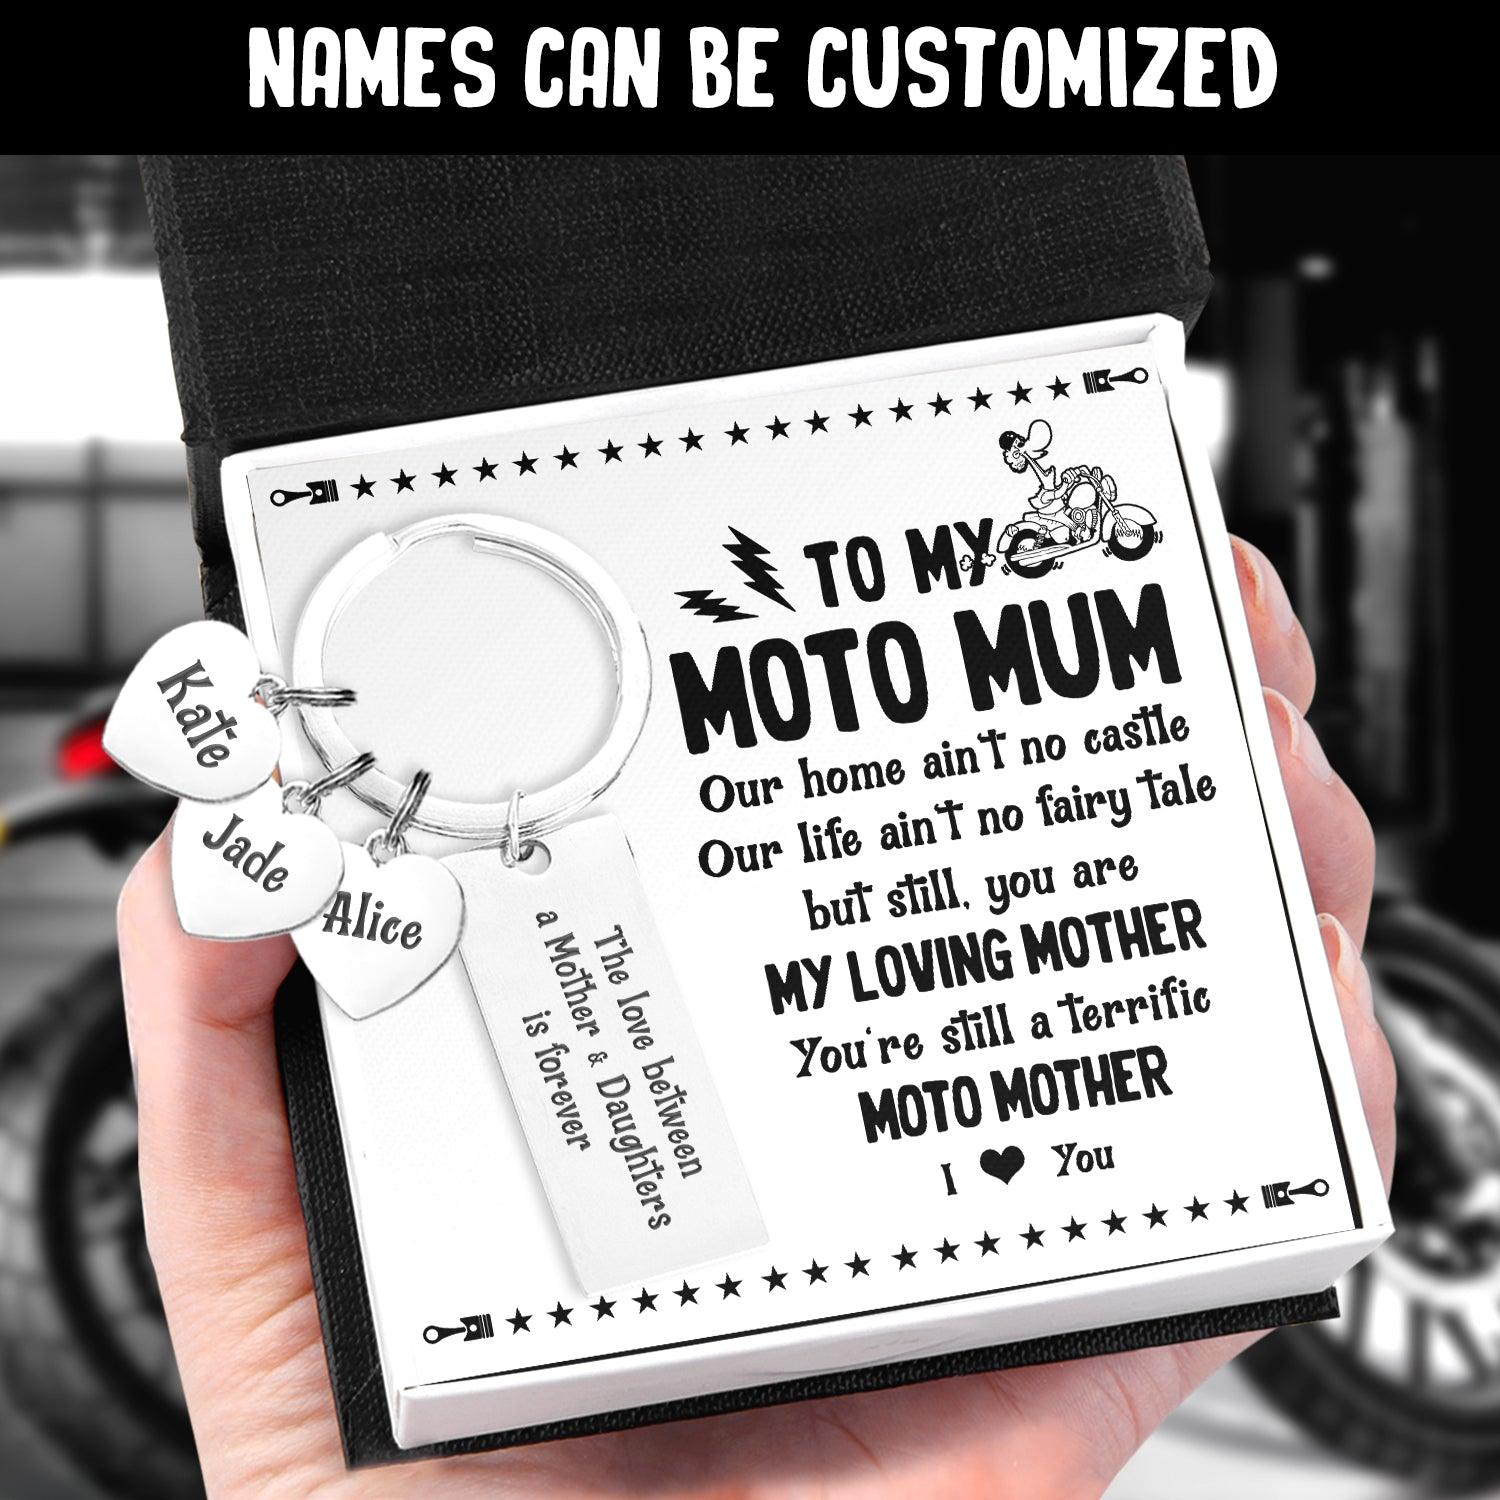 Personalised Keychain - Biker - To My Moto Mum - From Daughter - You're Still A Terrific Moto Mother - Augkc19003 - Gifts Holder